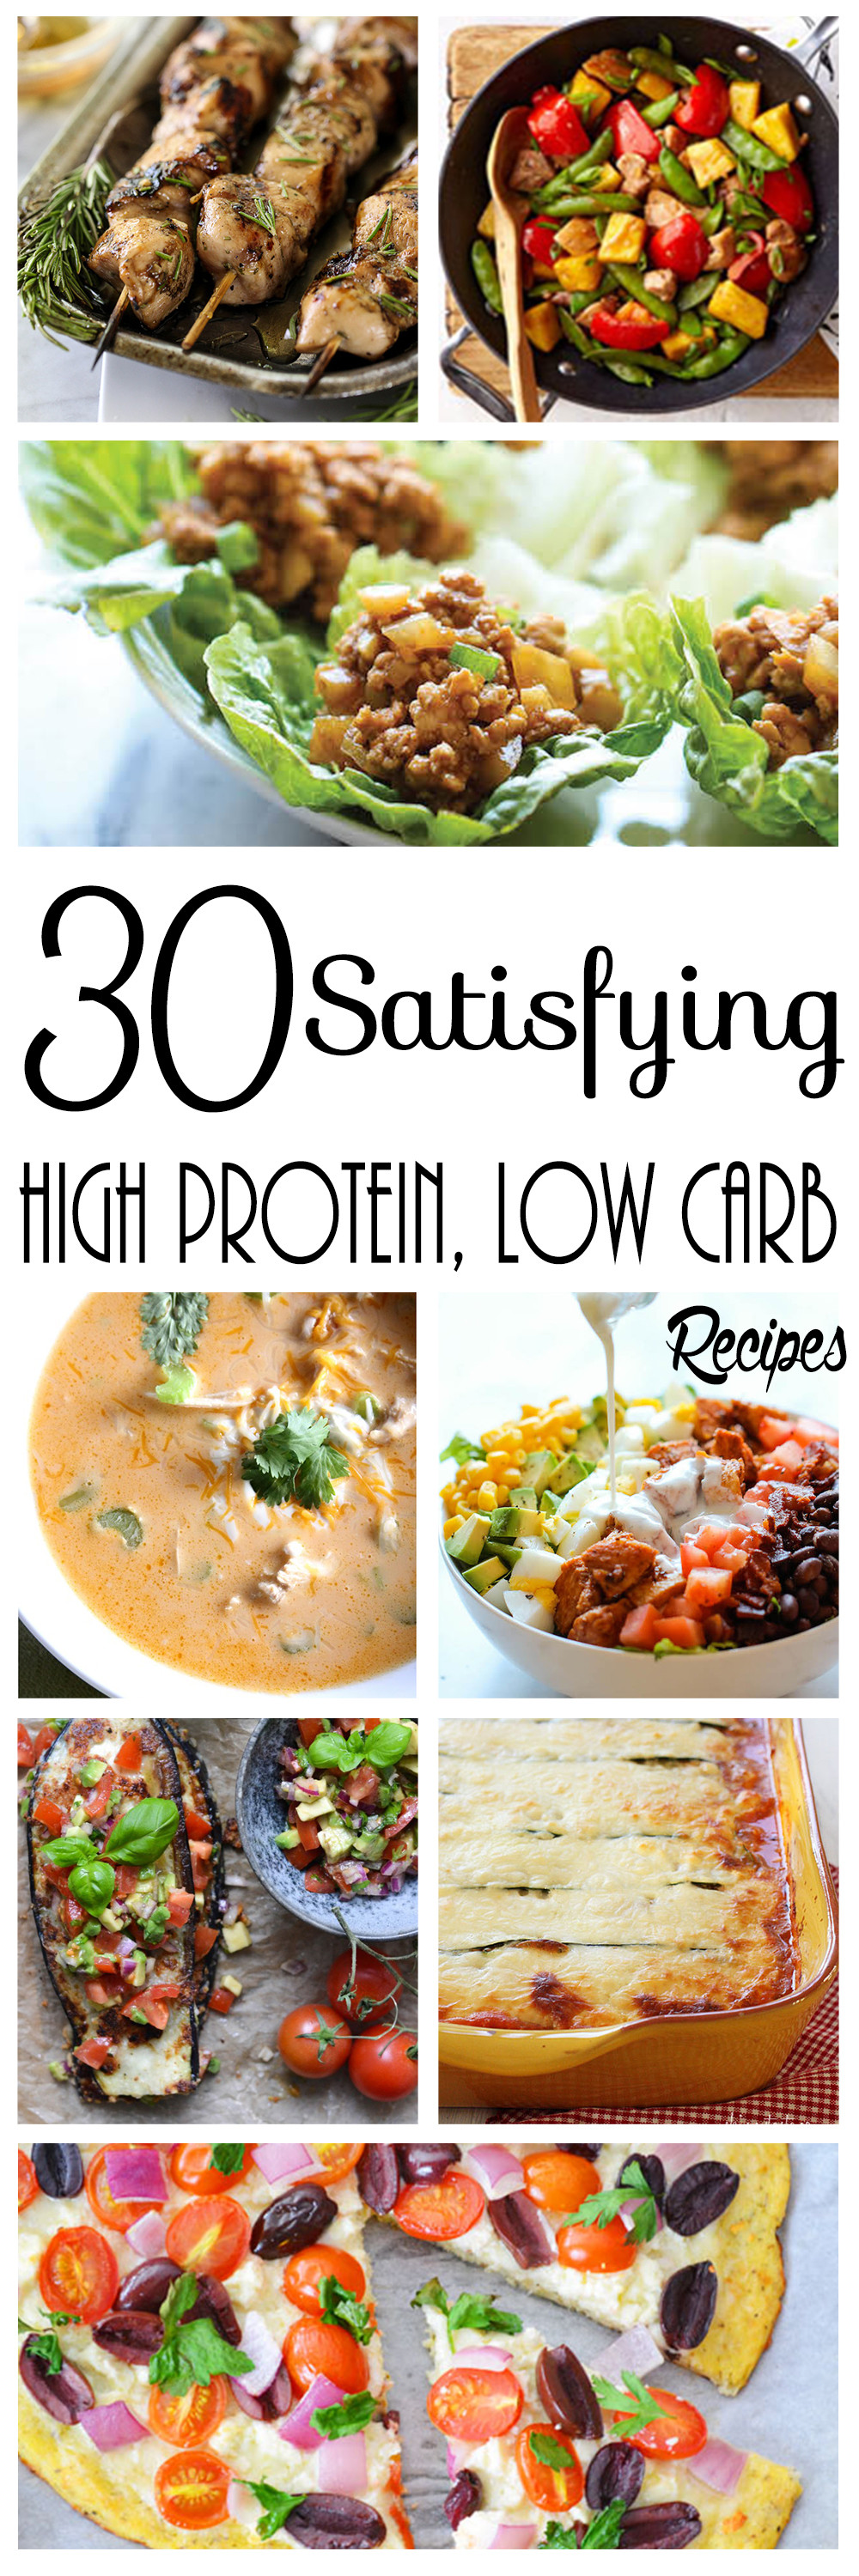 Healthy Low Carb High Protein Recipes top 20 30 Satisfying High Protein Low Carb Recipes Full